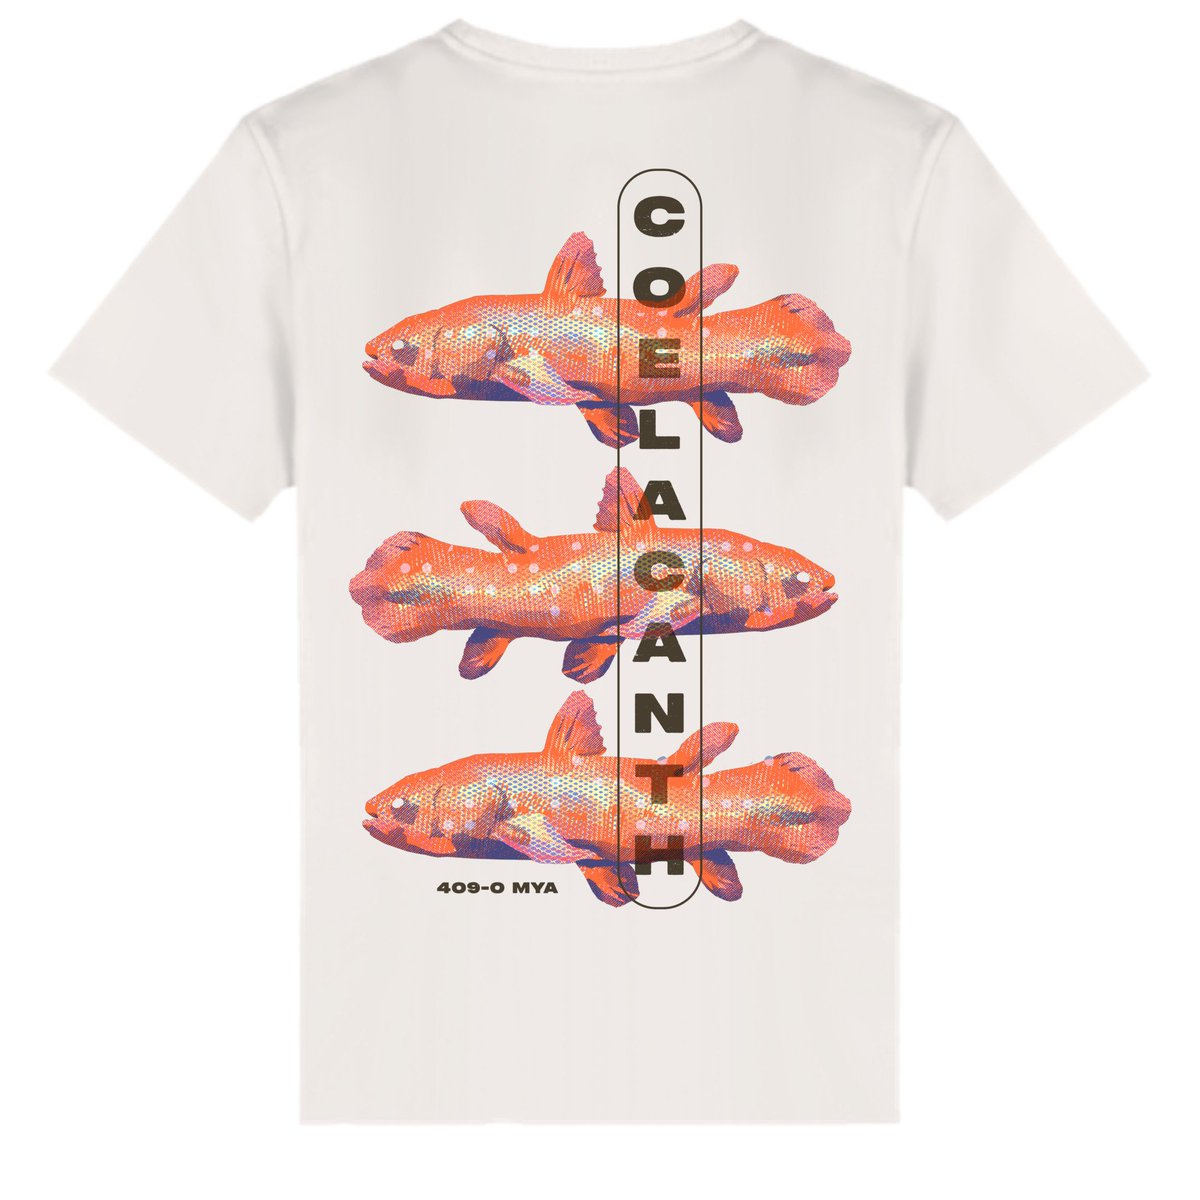 「My fish shirts are live! you can get one」|Hannaのイラスト